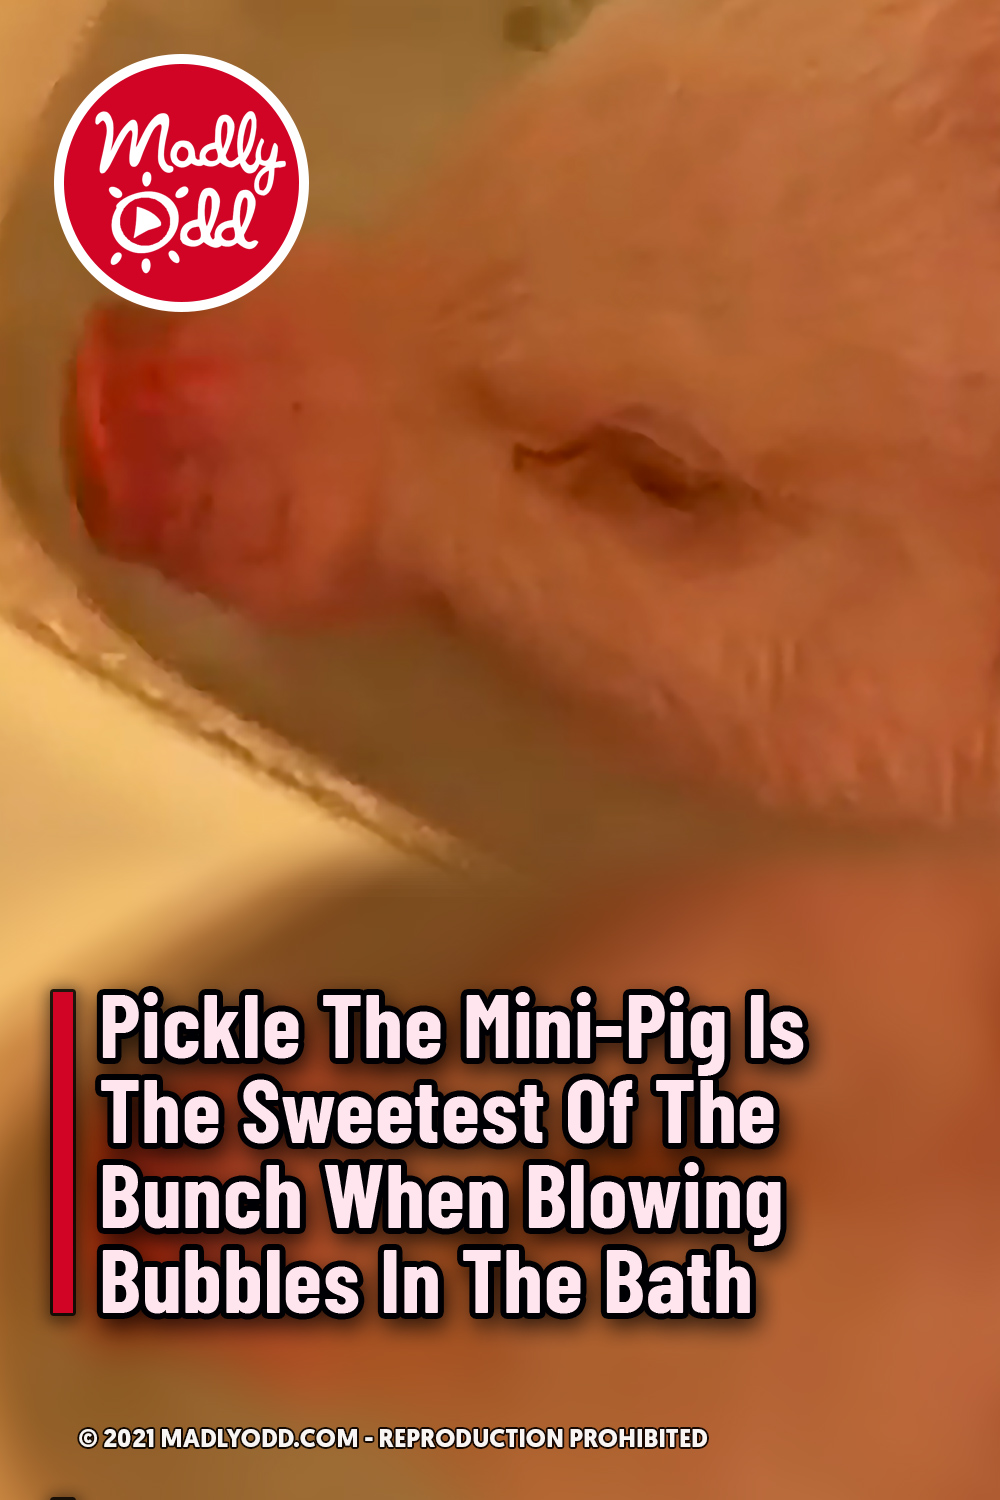 Pickle The Mini-Pig Is The Sweetest Of The Bunch When Blowing Bubbles In The Bath